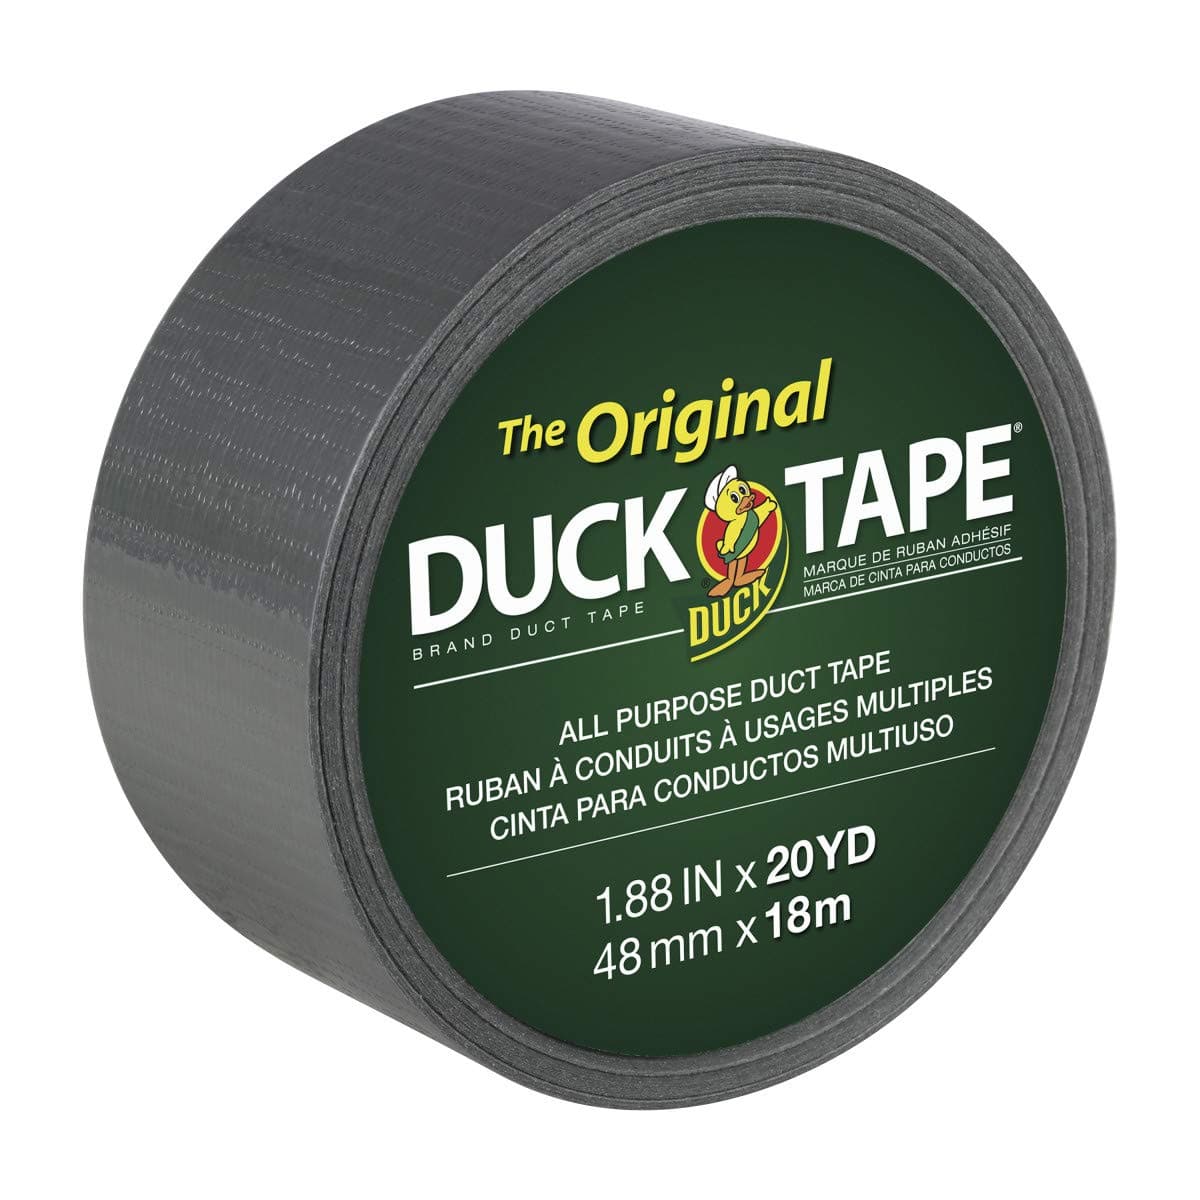 Duck Duck Tape, Island Lime